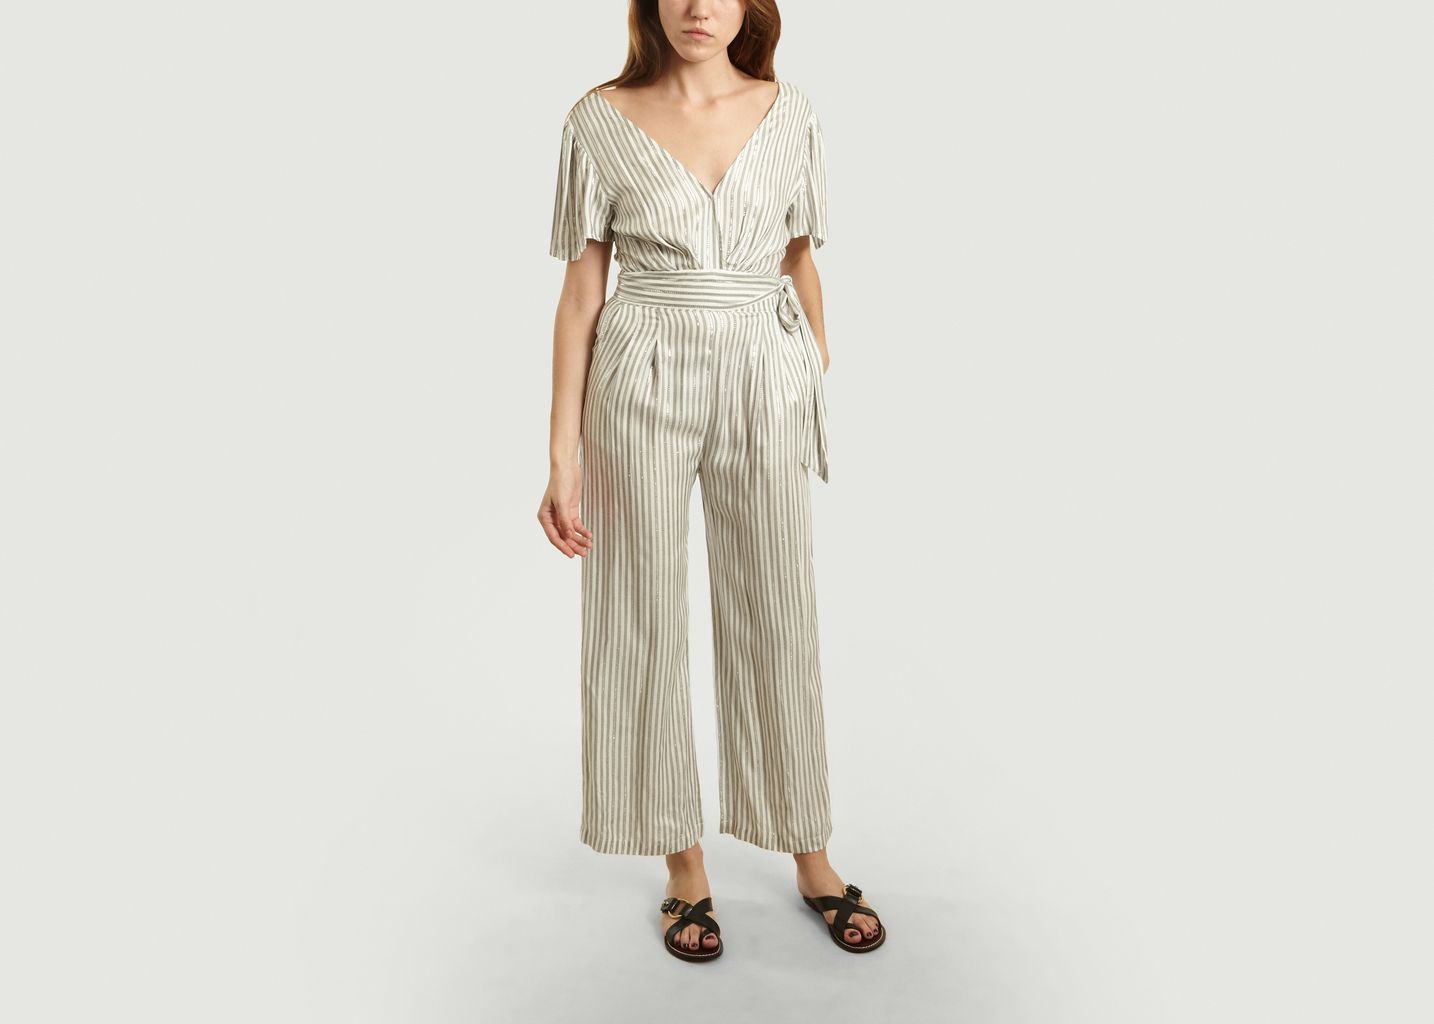 Thelma Jumpsuit with Lurex Details - Suncoo